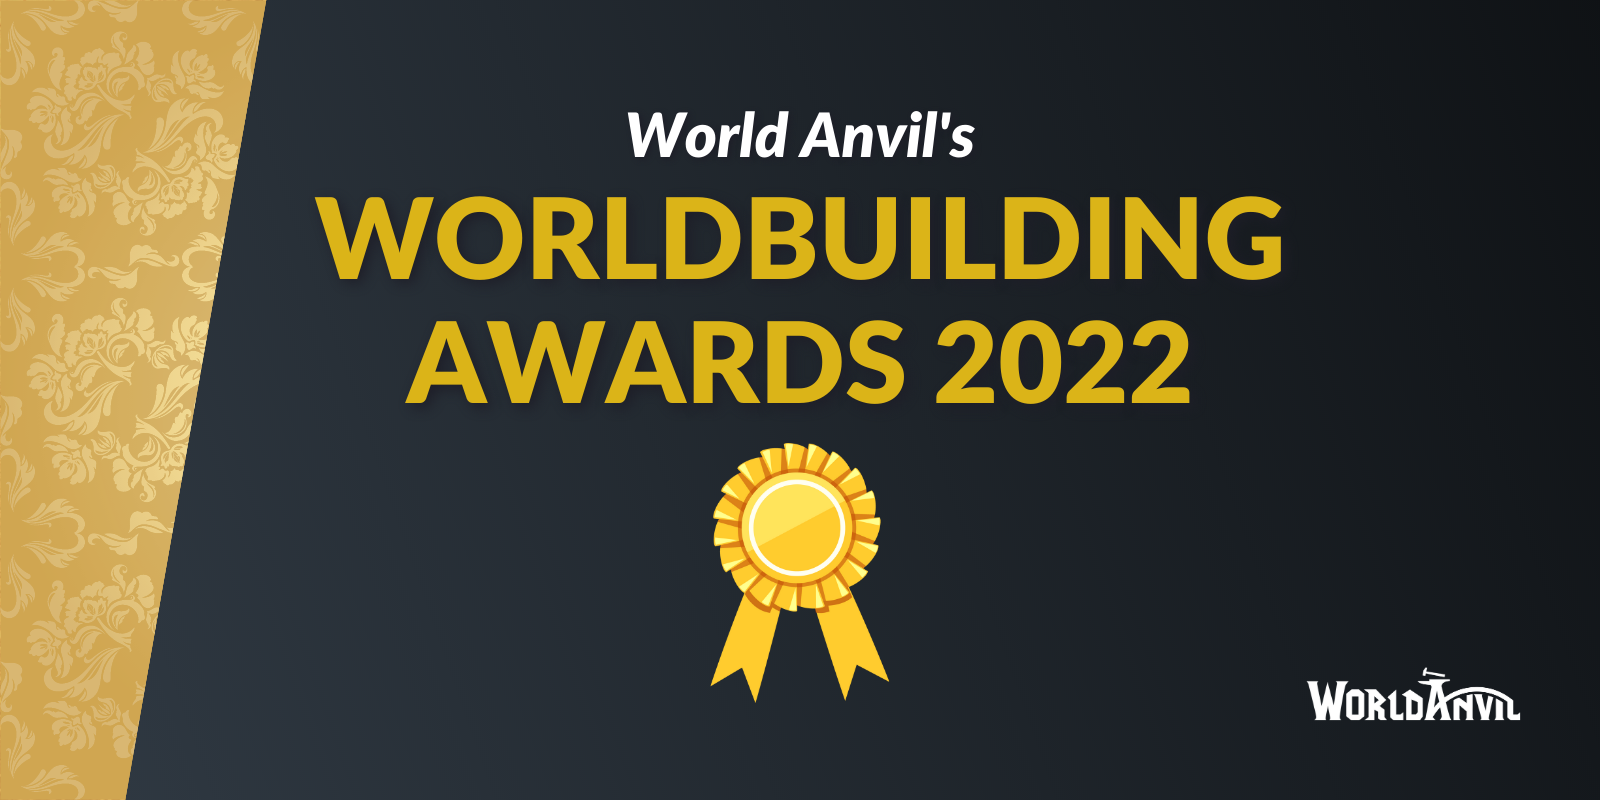 How to win during the World Anvil Worldbuilding Awards